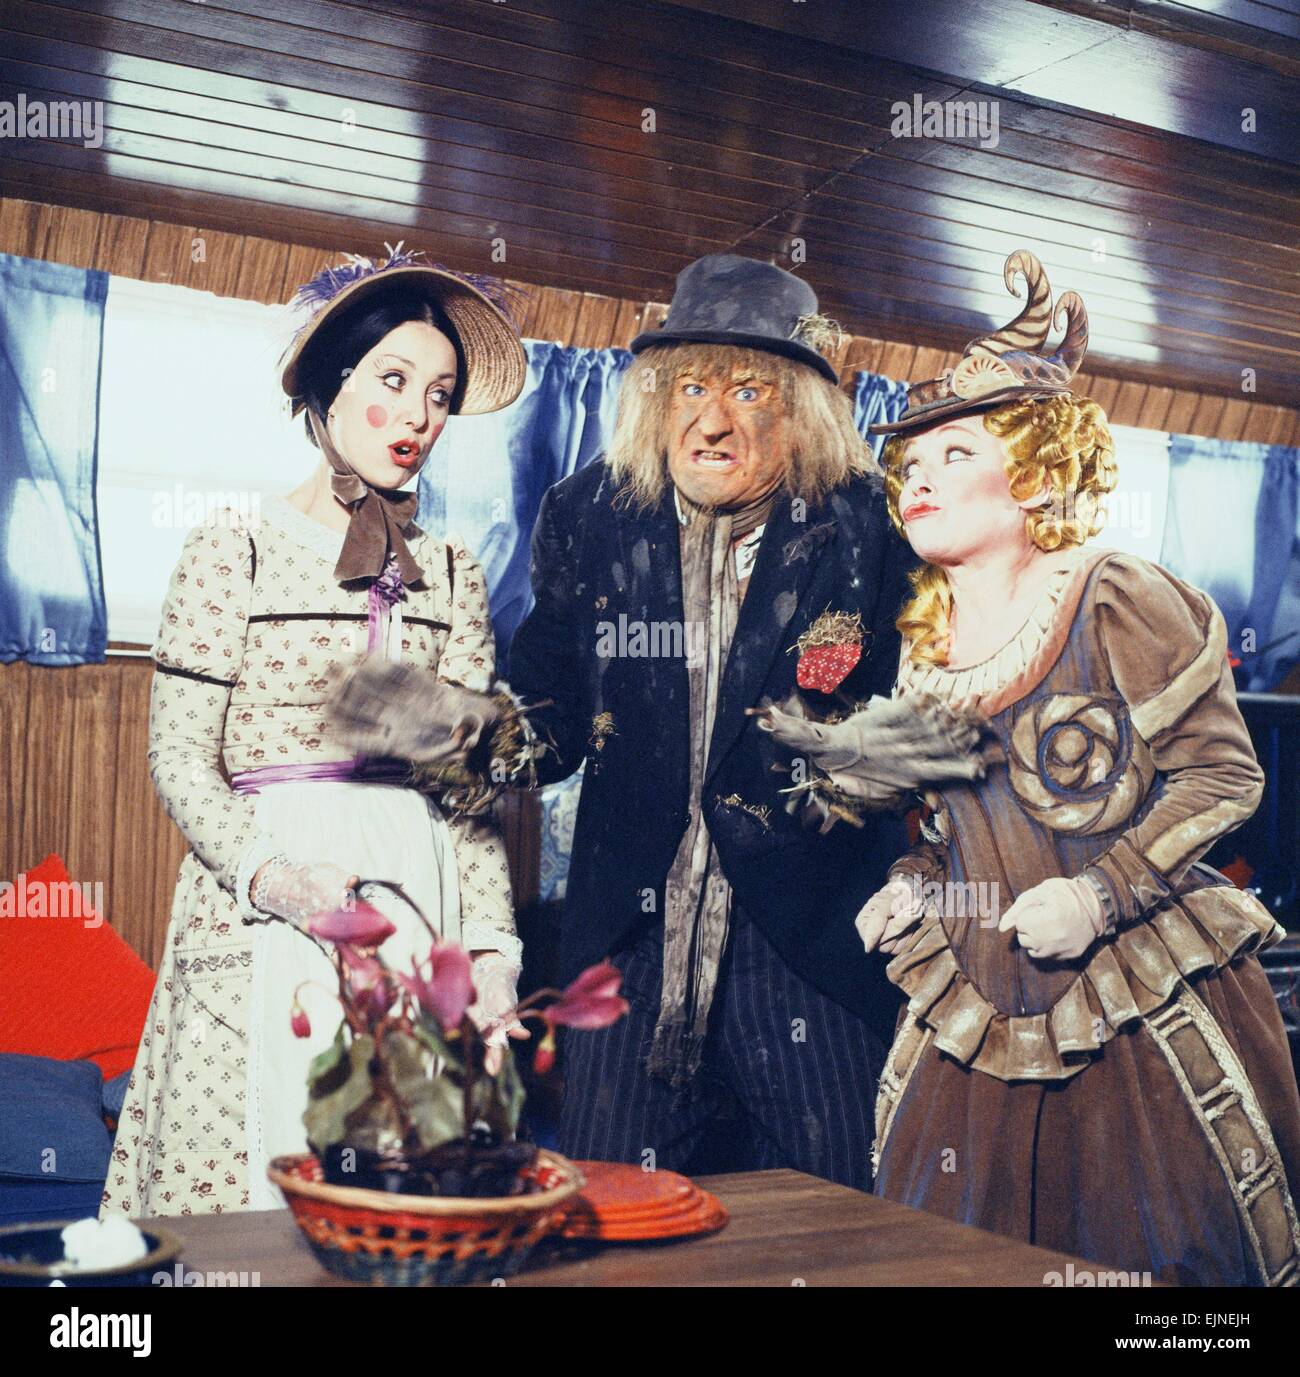 Left to Right Una Stubbs as Aunt Sally, Jon Pertwee as Worzel and Barbara Windsor as Saucy Nancy seen here shooting a scene for the Southern Television childrens series Worzel Gummidge. 21st October 1980 *** Local Caption *** Scanned from trannies held at the Coventry Telegraphwatscan - - 13/08/2010 Stock Photo